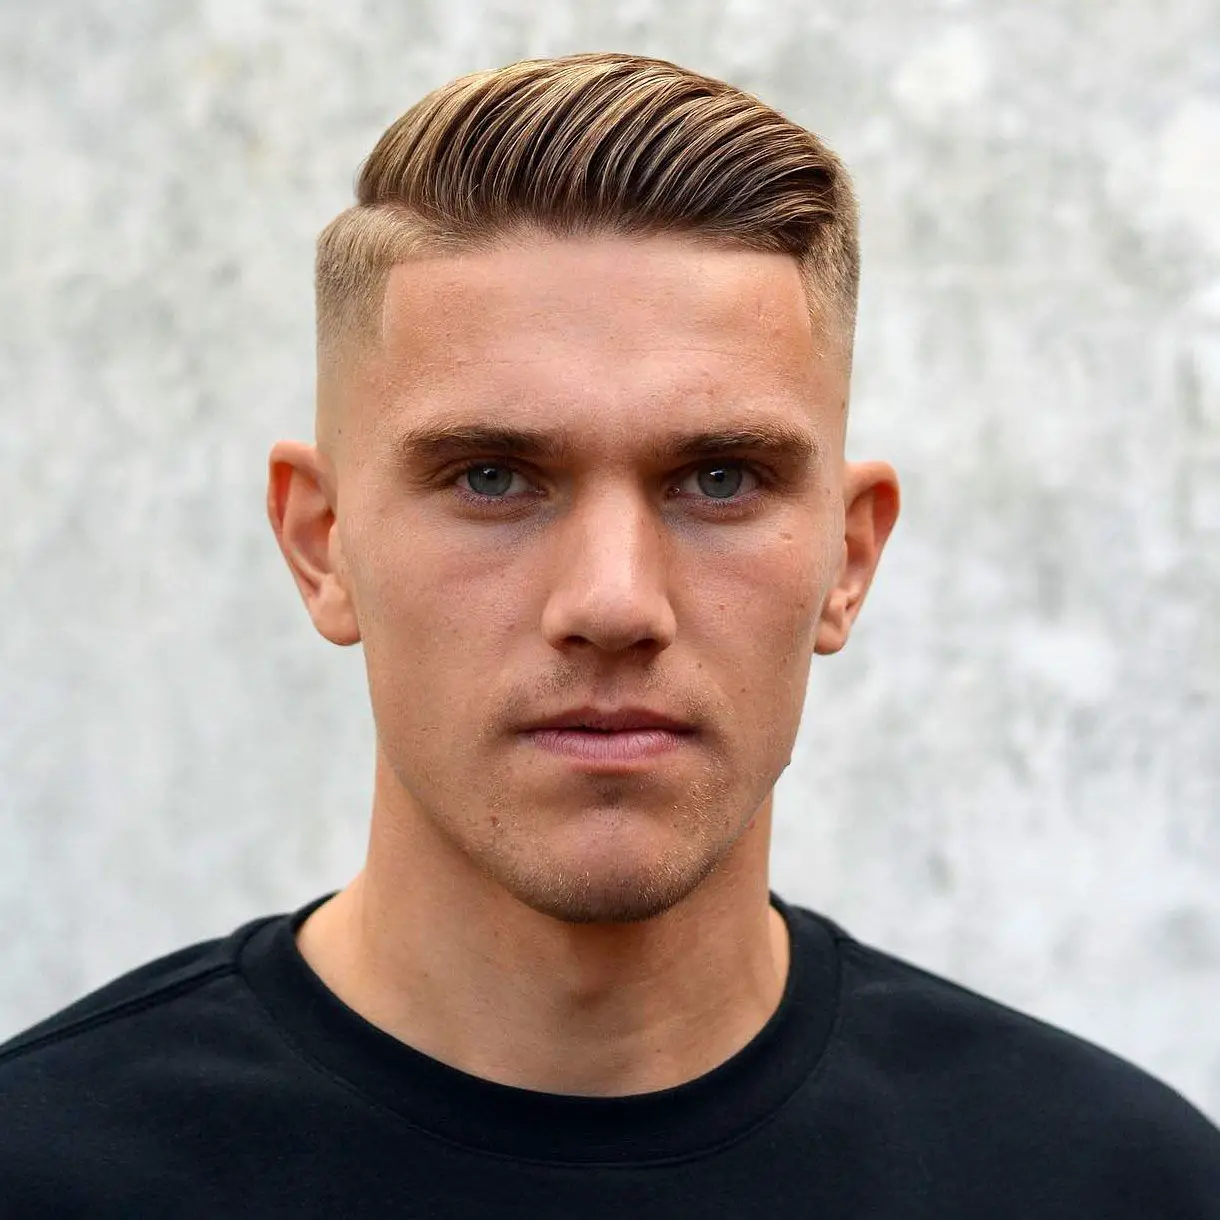 75-volumizing-hairstyle-ideas-for-men-with-thin-hair Combover With Fade